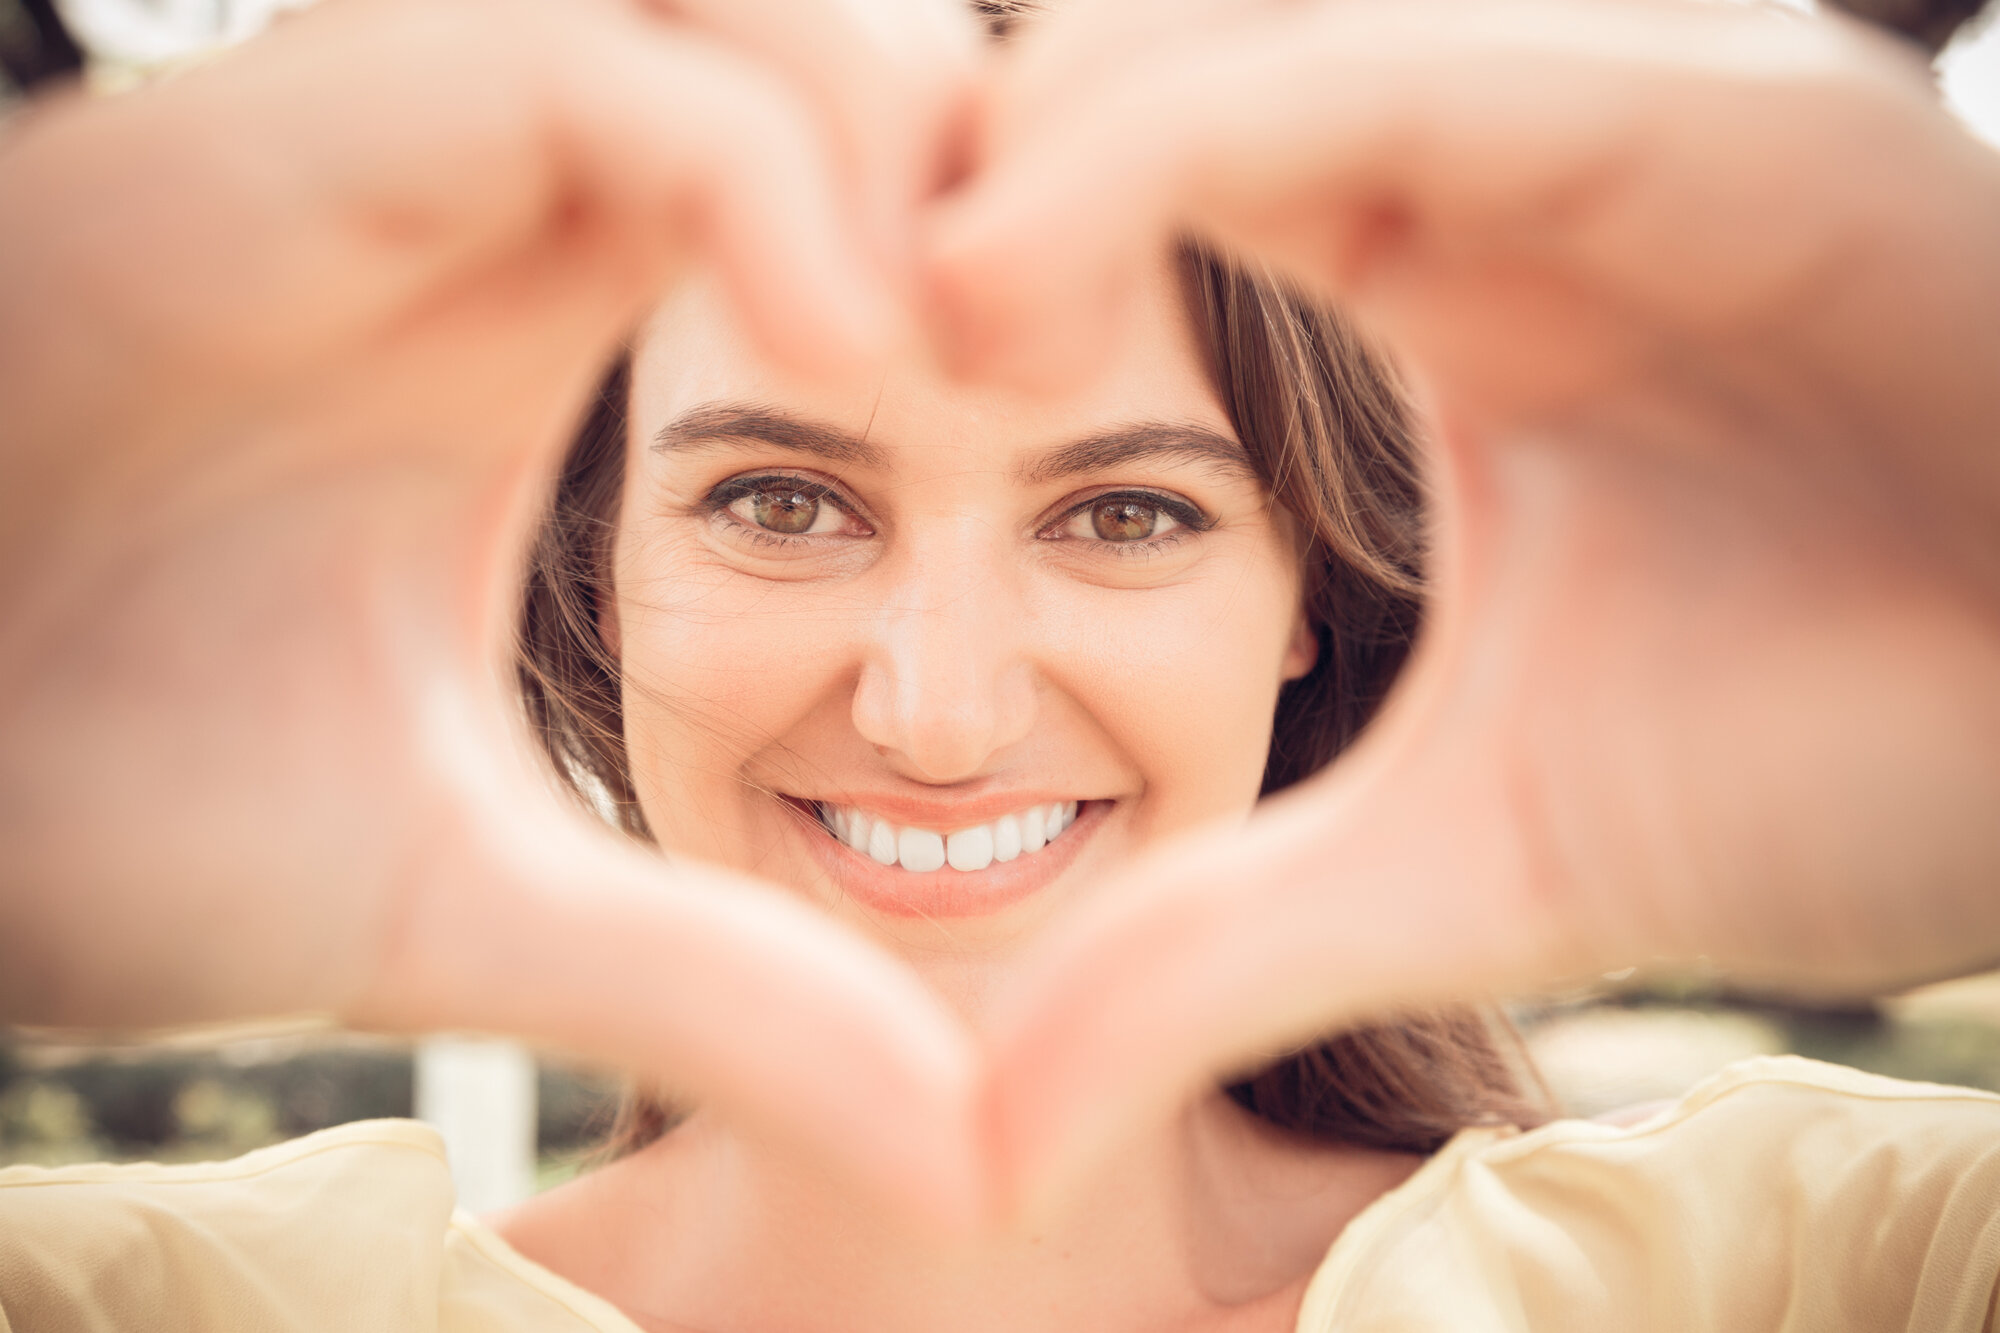 photo of a woman smiling and making a heart shape